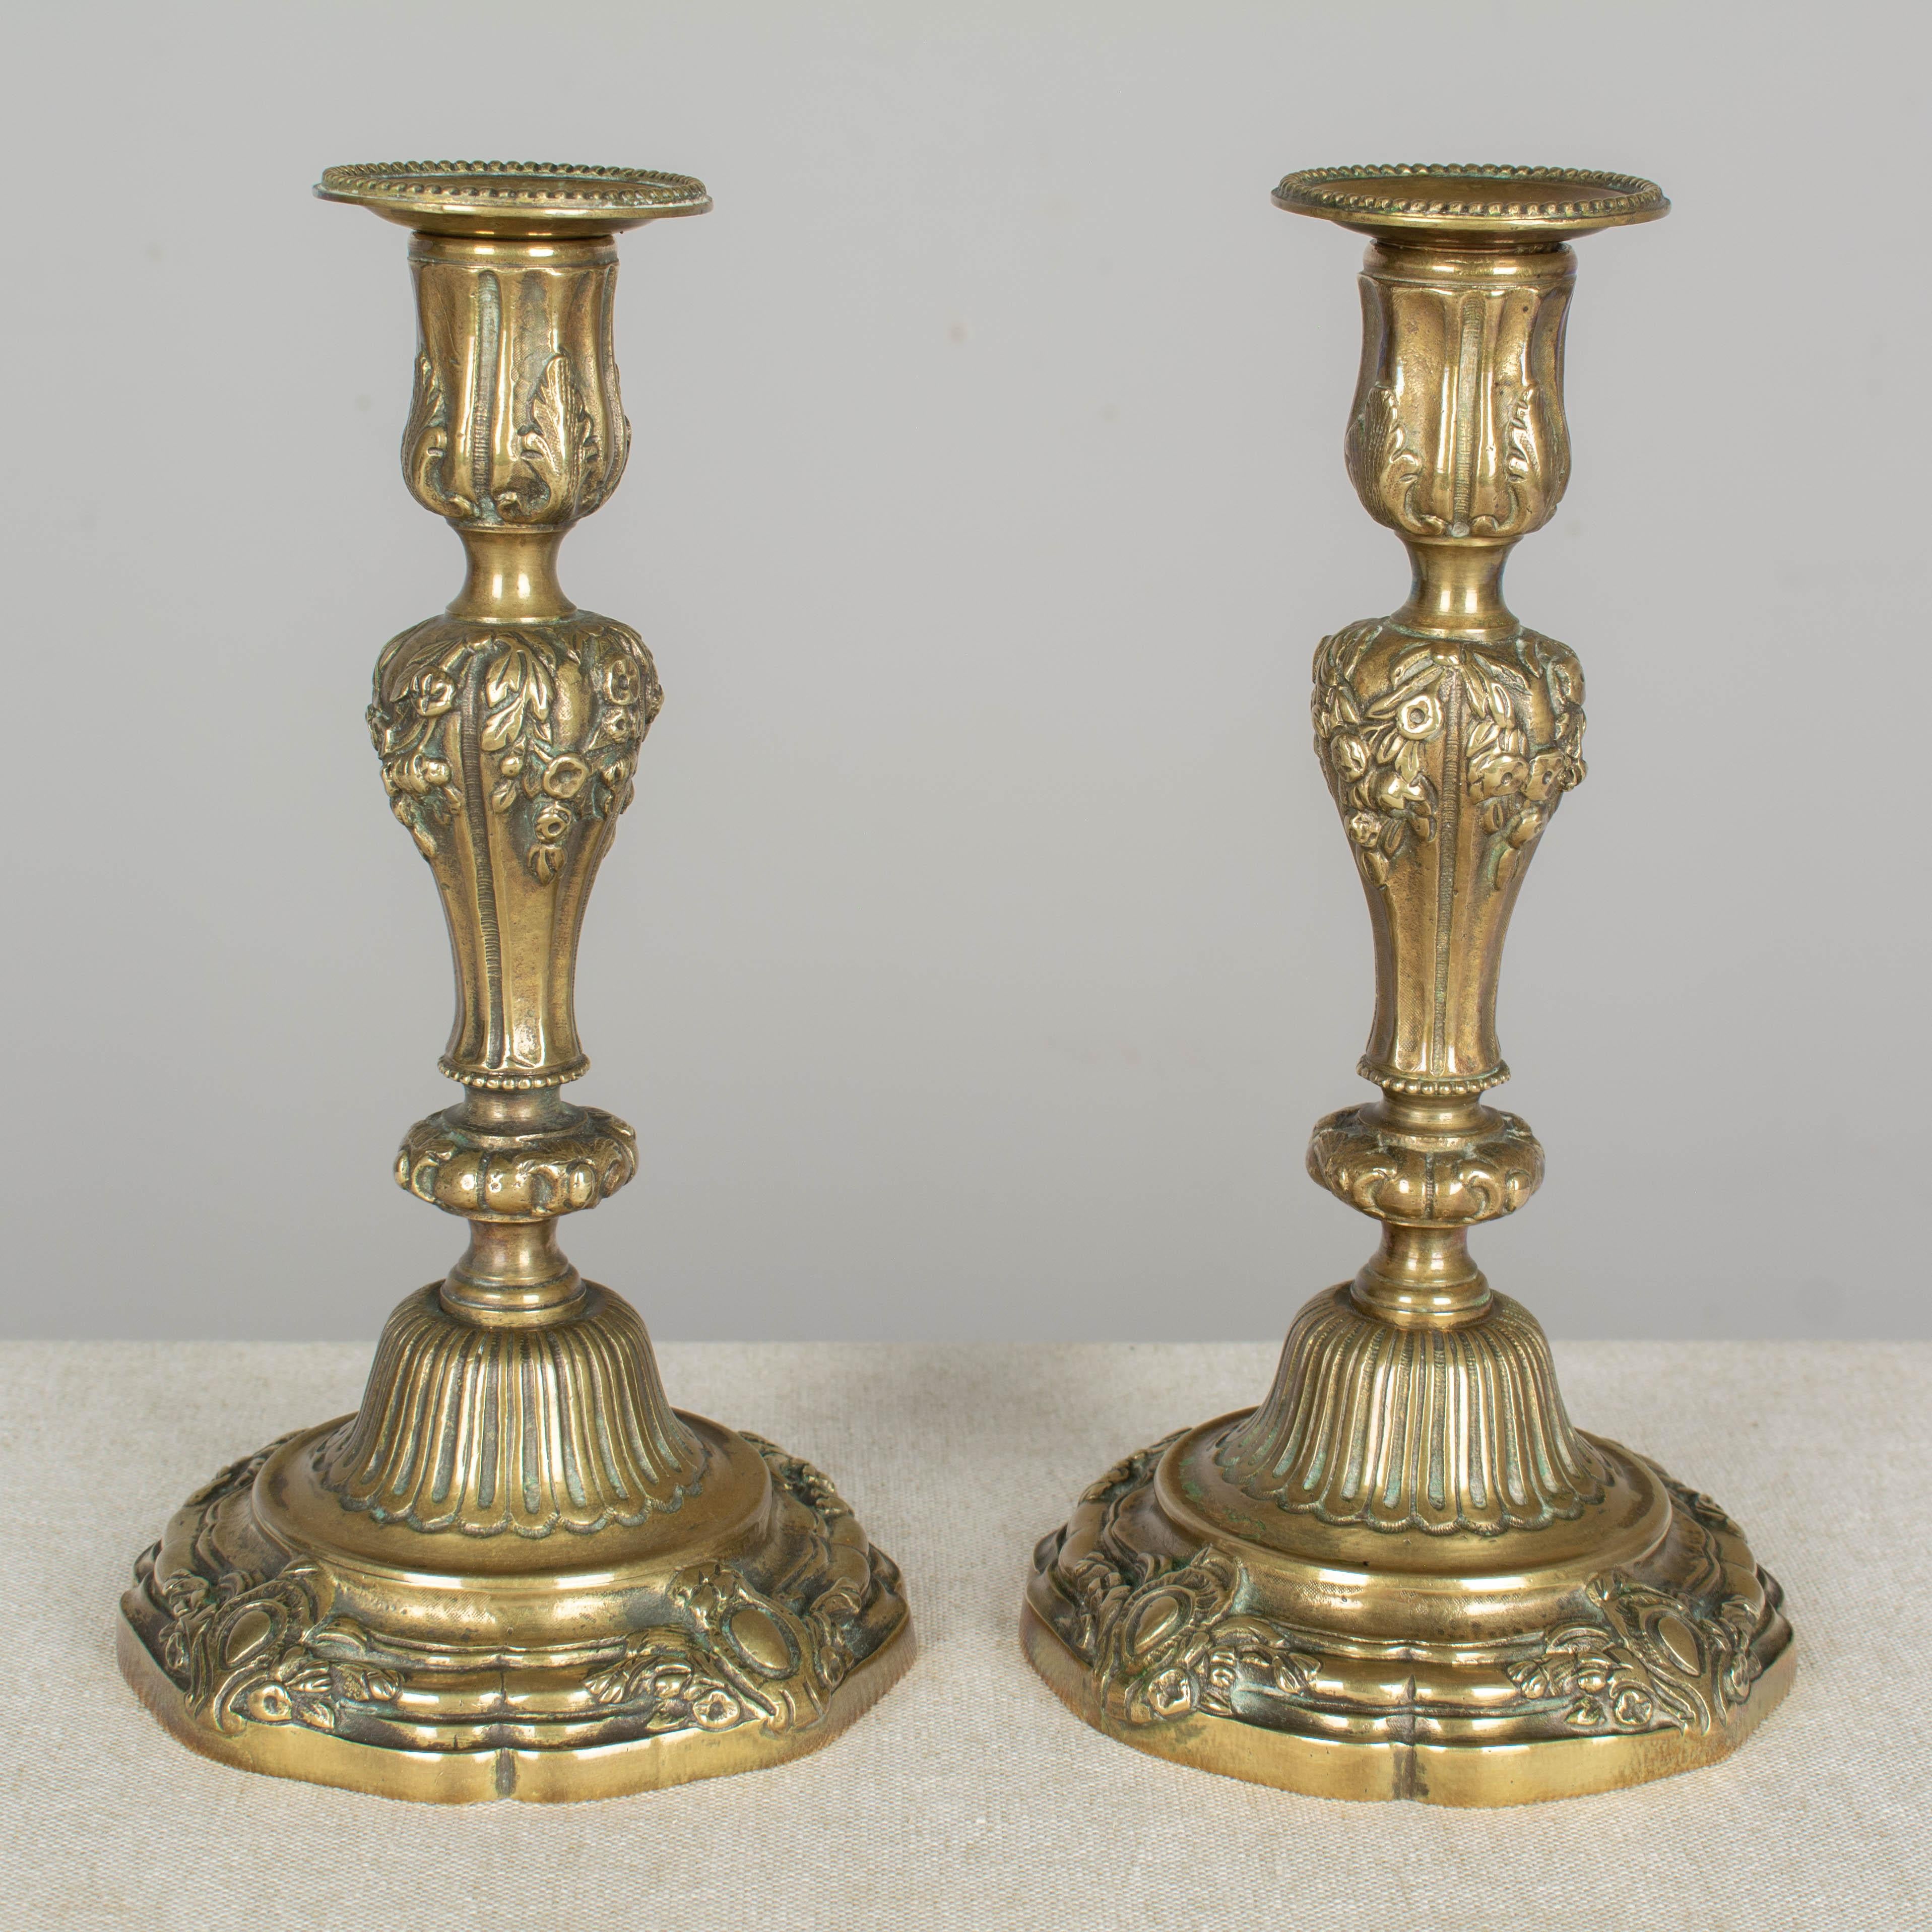 Cast Pair of 19th Century French Bronze Candlesticks